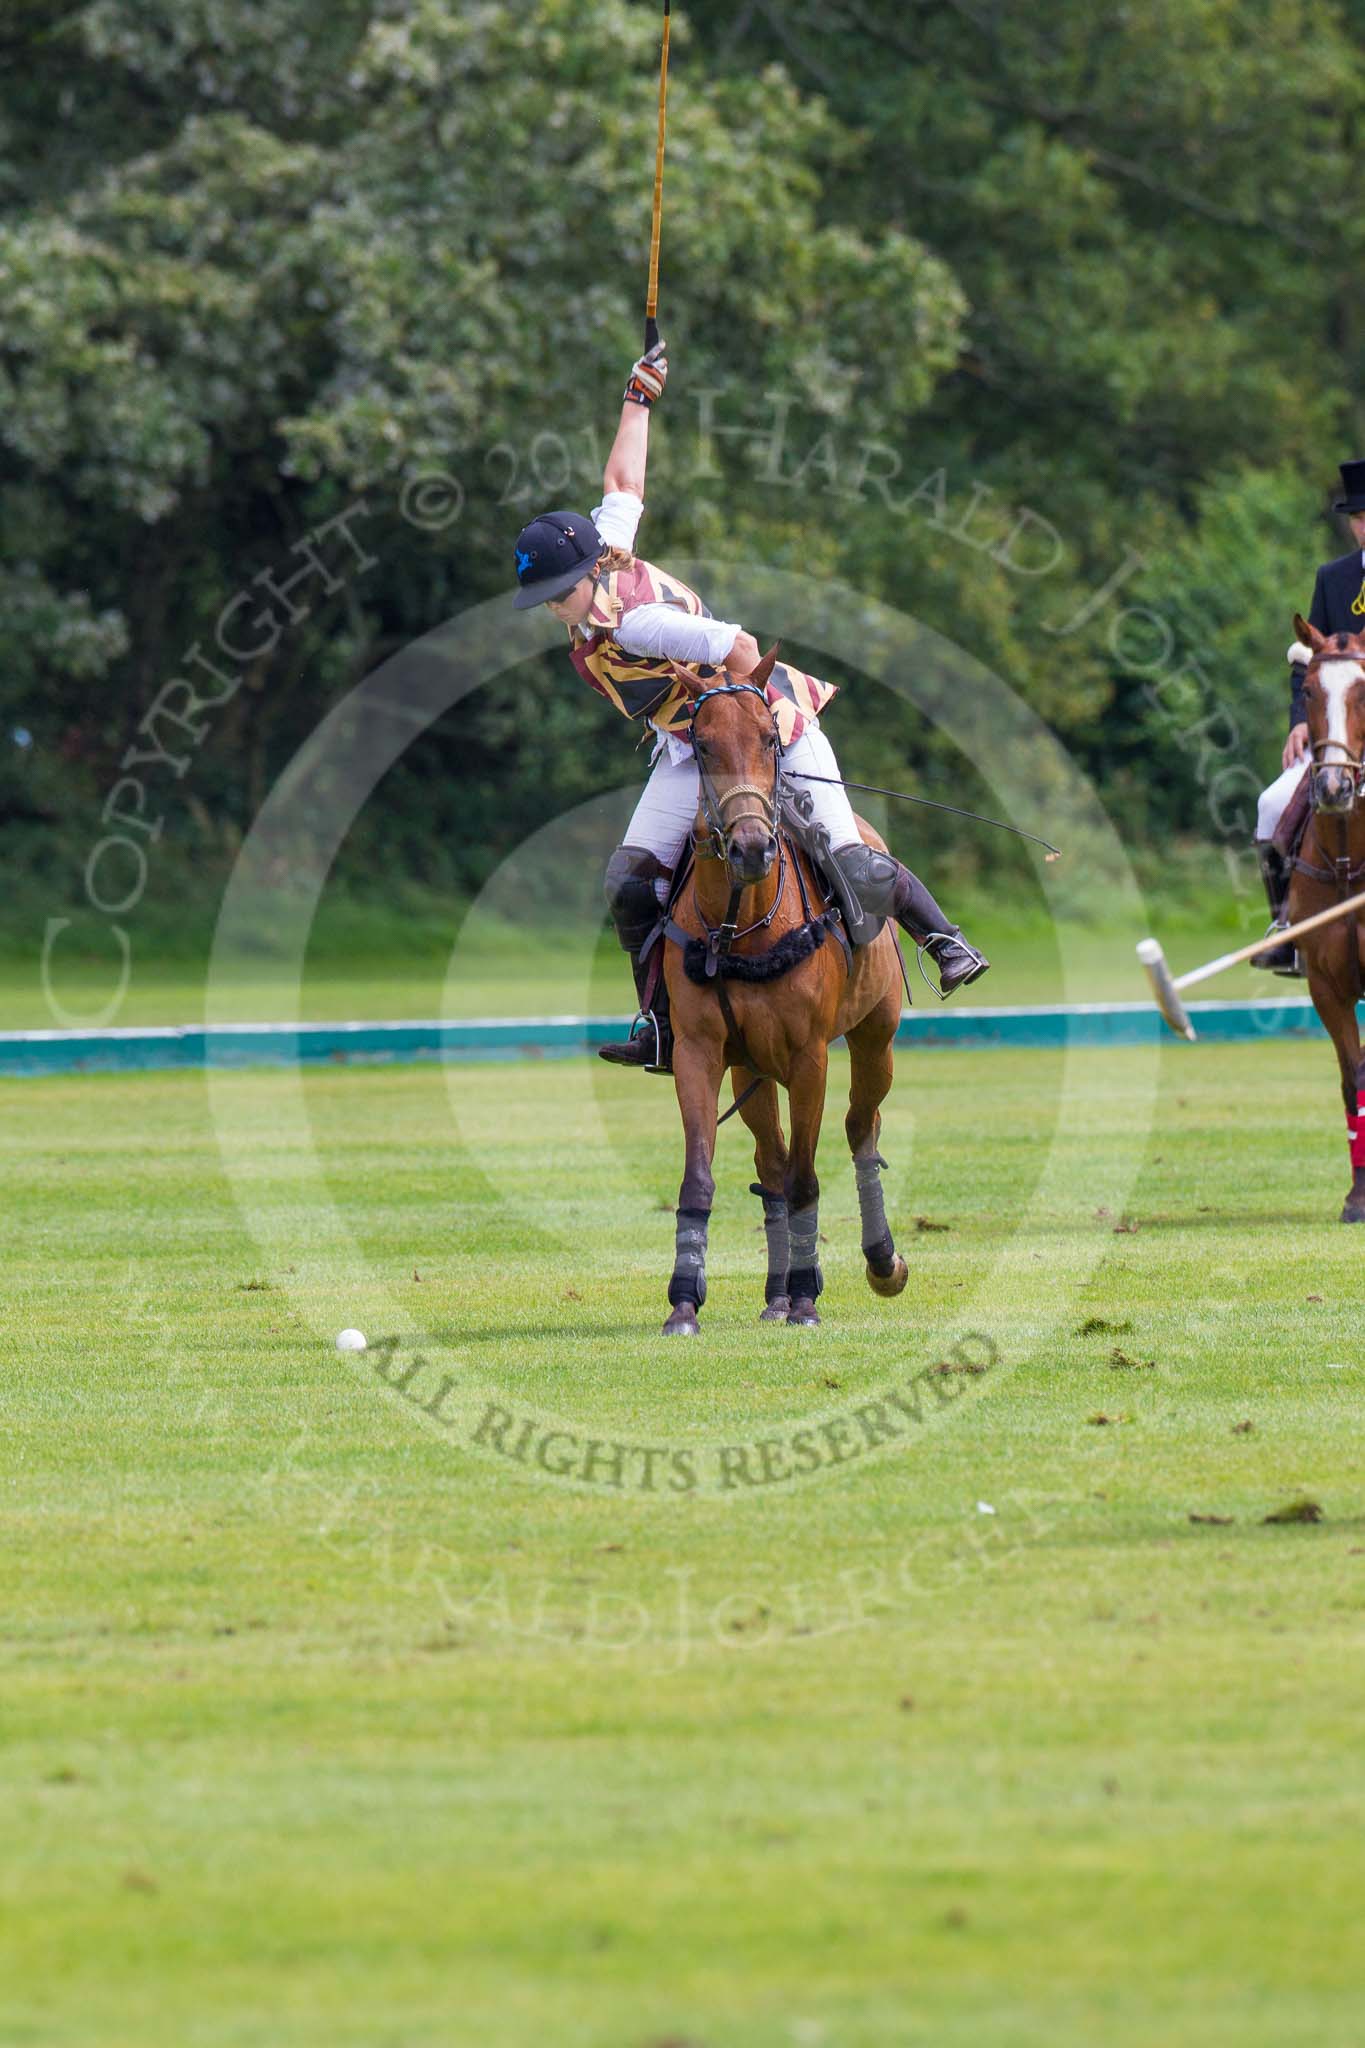 7th Heritage Polo Cup semi-finals: Penalty 4 Rosie Ross in full swing..
Hurtwood Park Polo Club,
Ewhurst Green,
Surrey,
United Kingdom,
on 04 August 2012 at 13:30, image #141